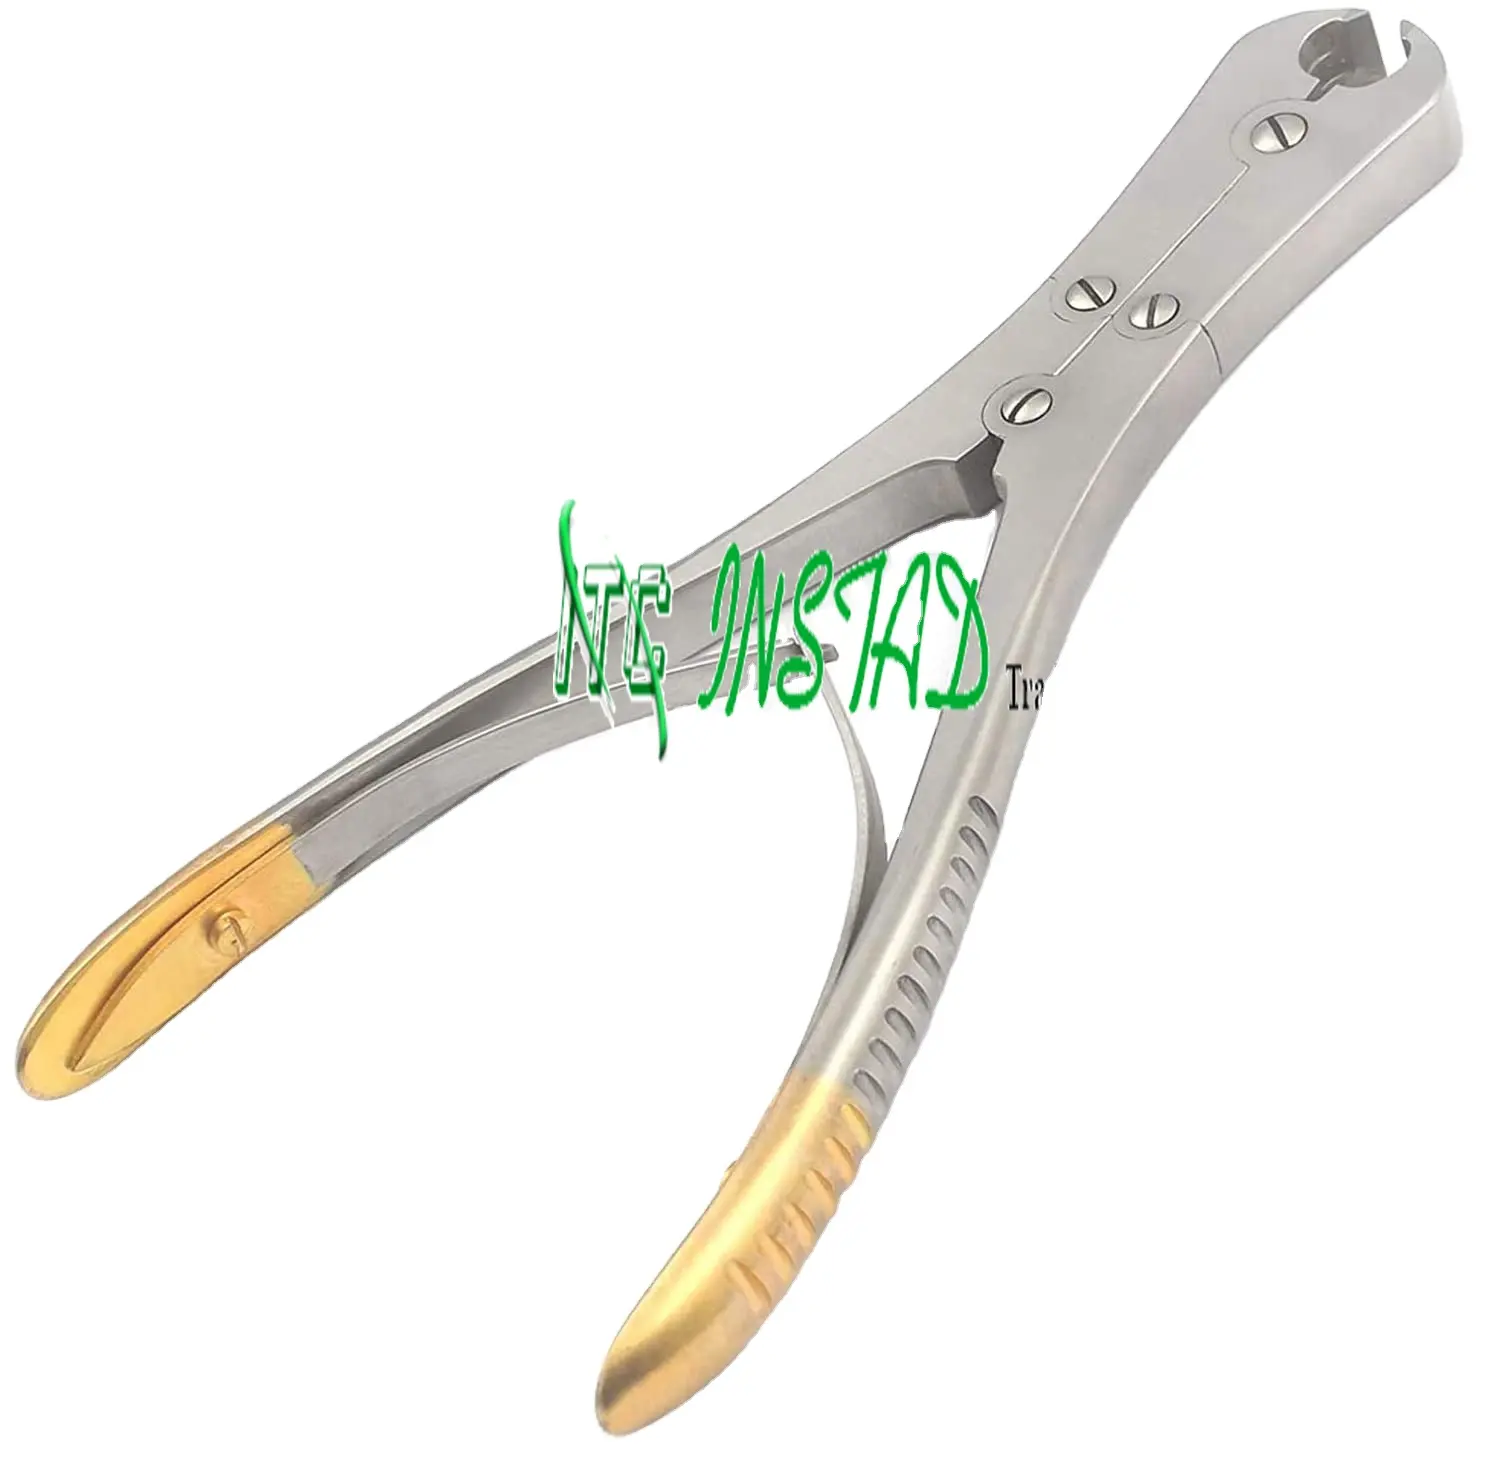 Gs Tc Cns Front & Side Pin Draad Cutter 7Inch Orthopedische Instrumenten